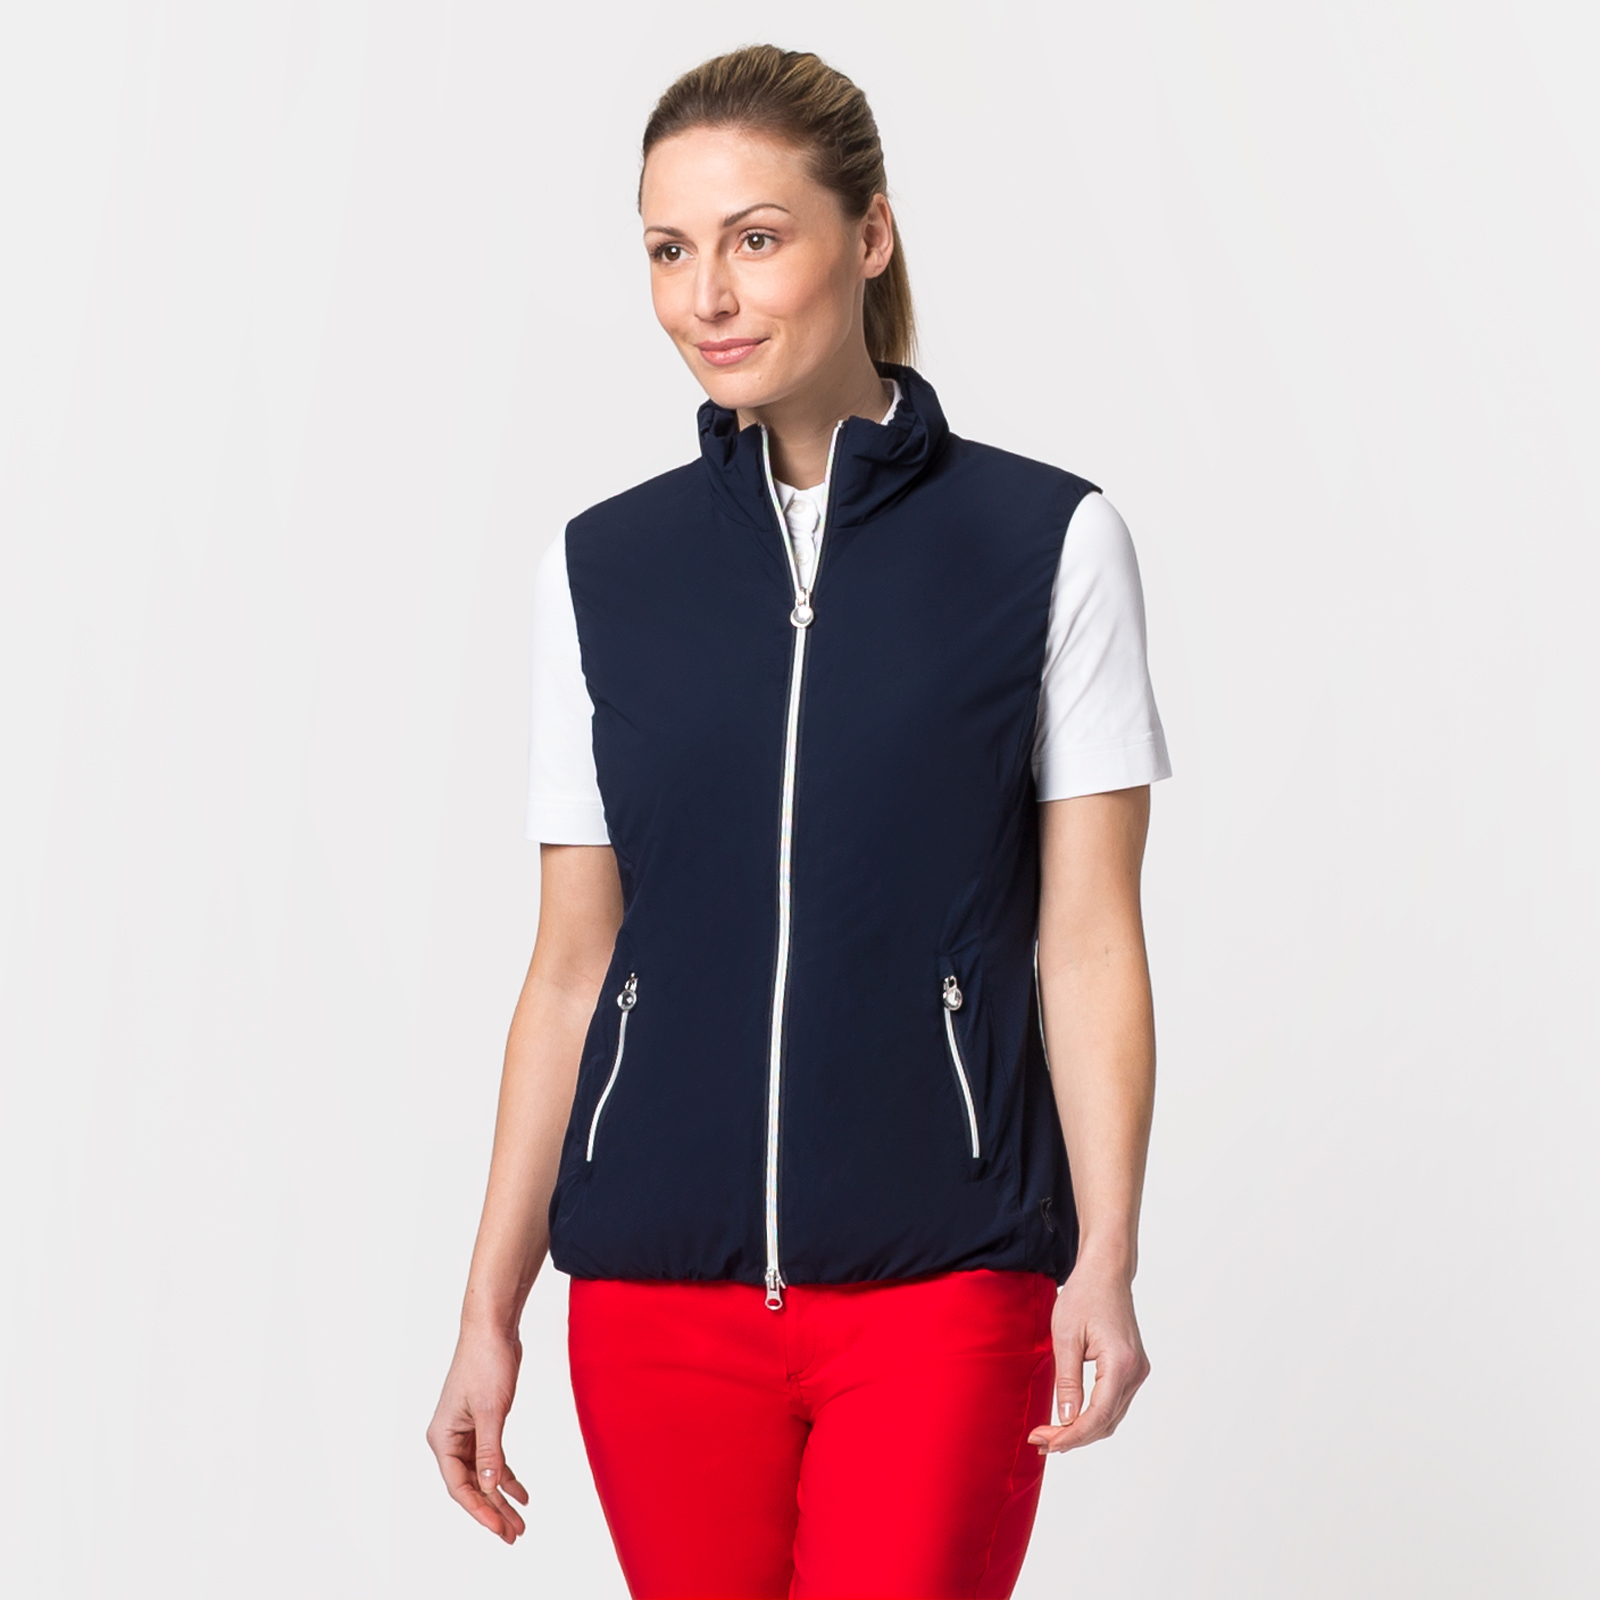 Ladies' golfing gilet made from elastic stretch material with mesh lining